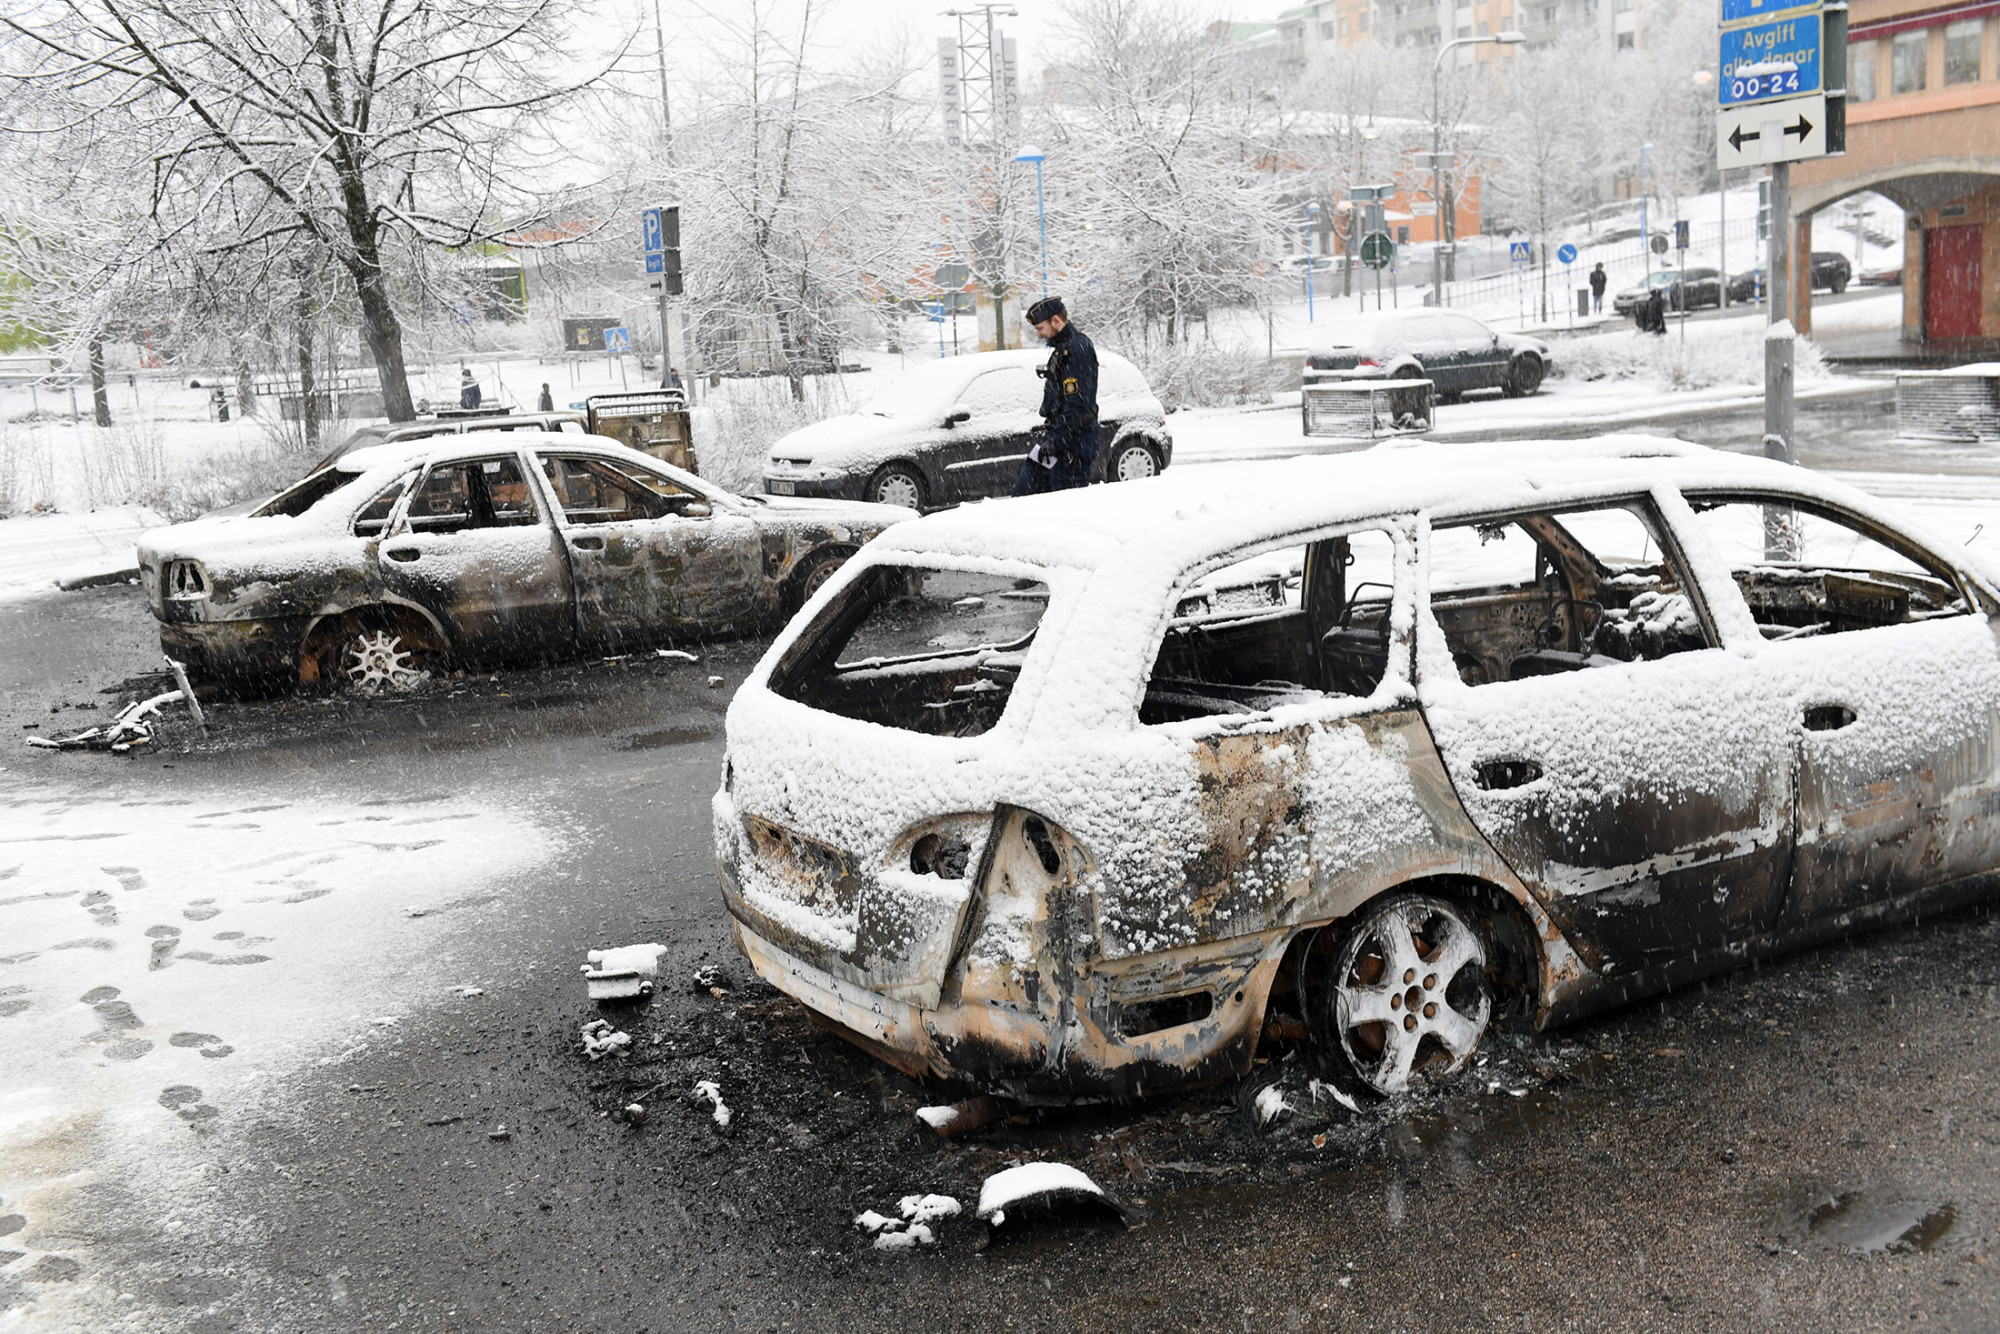 A policeman investigates a burned out car in the suburb of Rinkeby, outside Stockholm, on Feb. 20.
